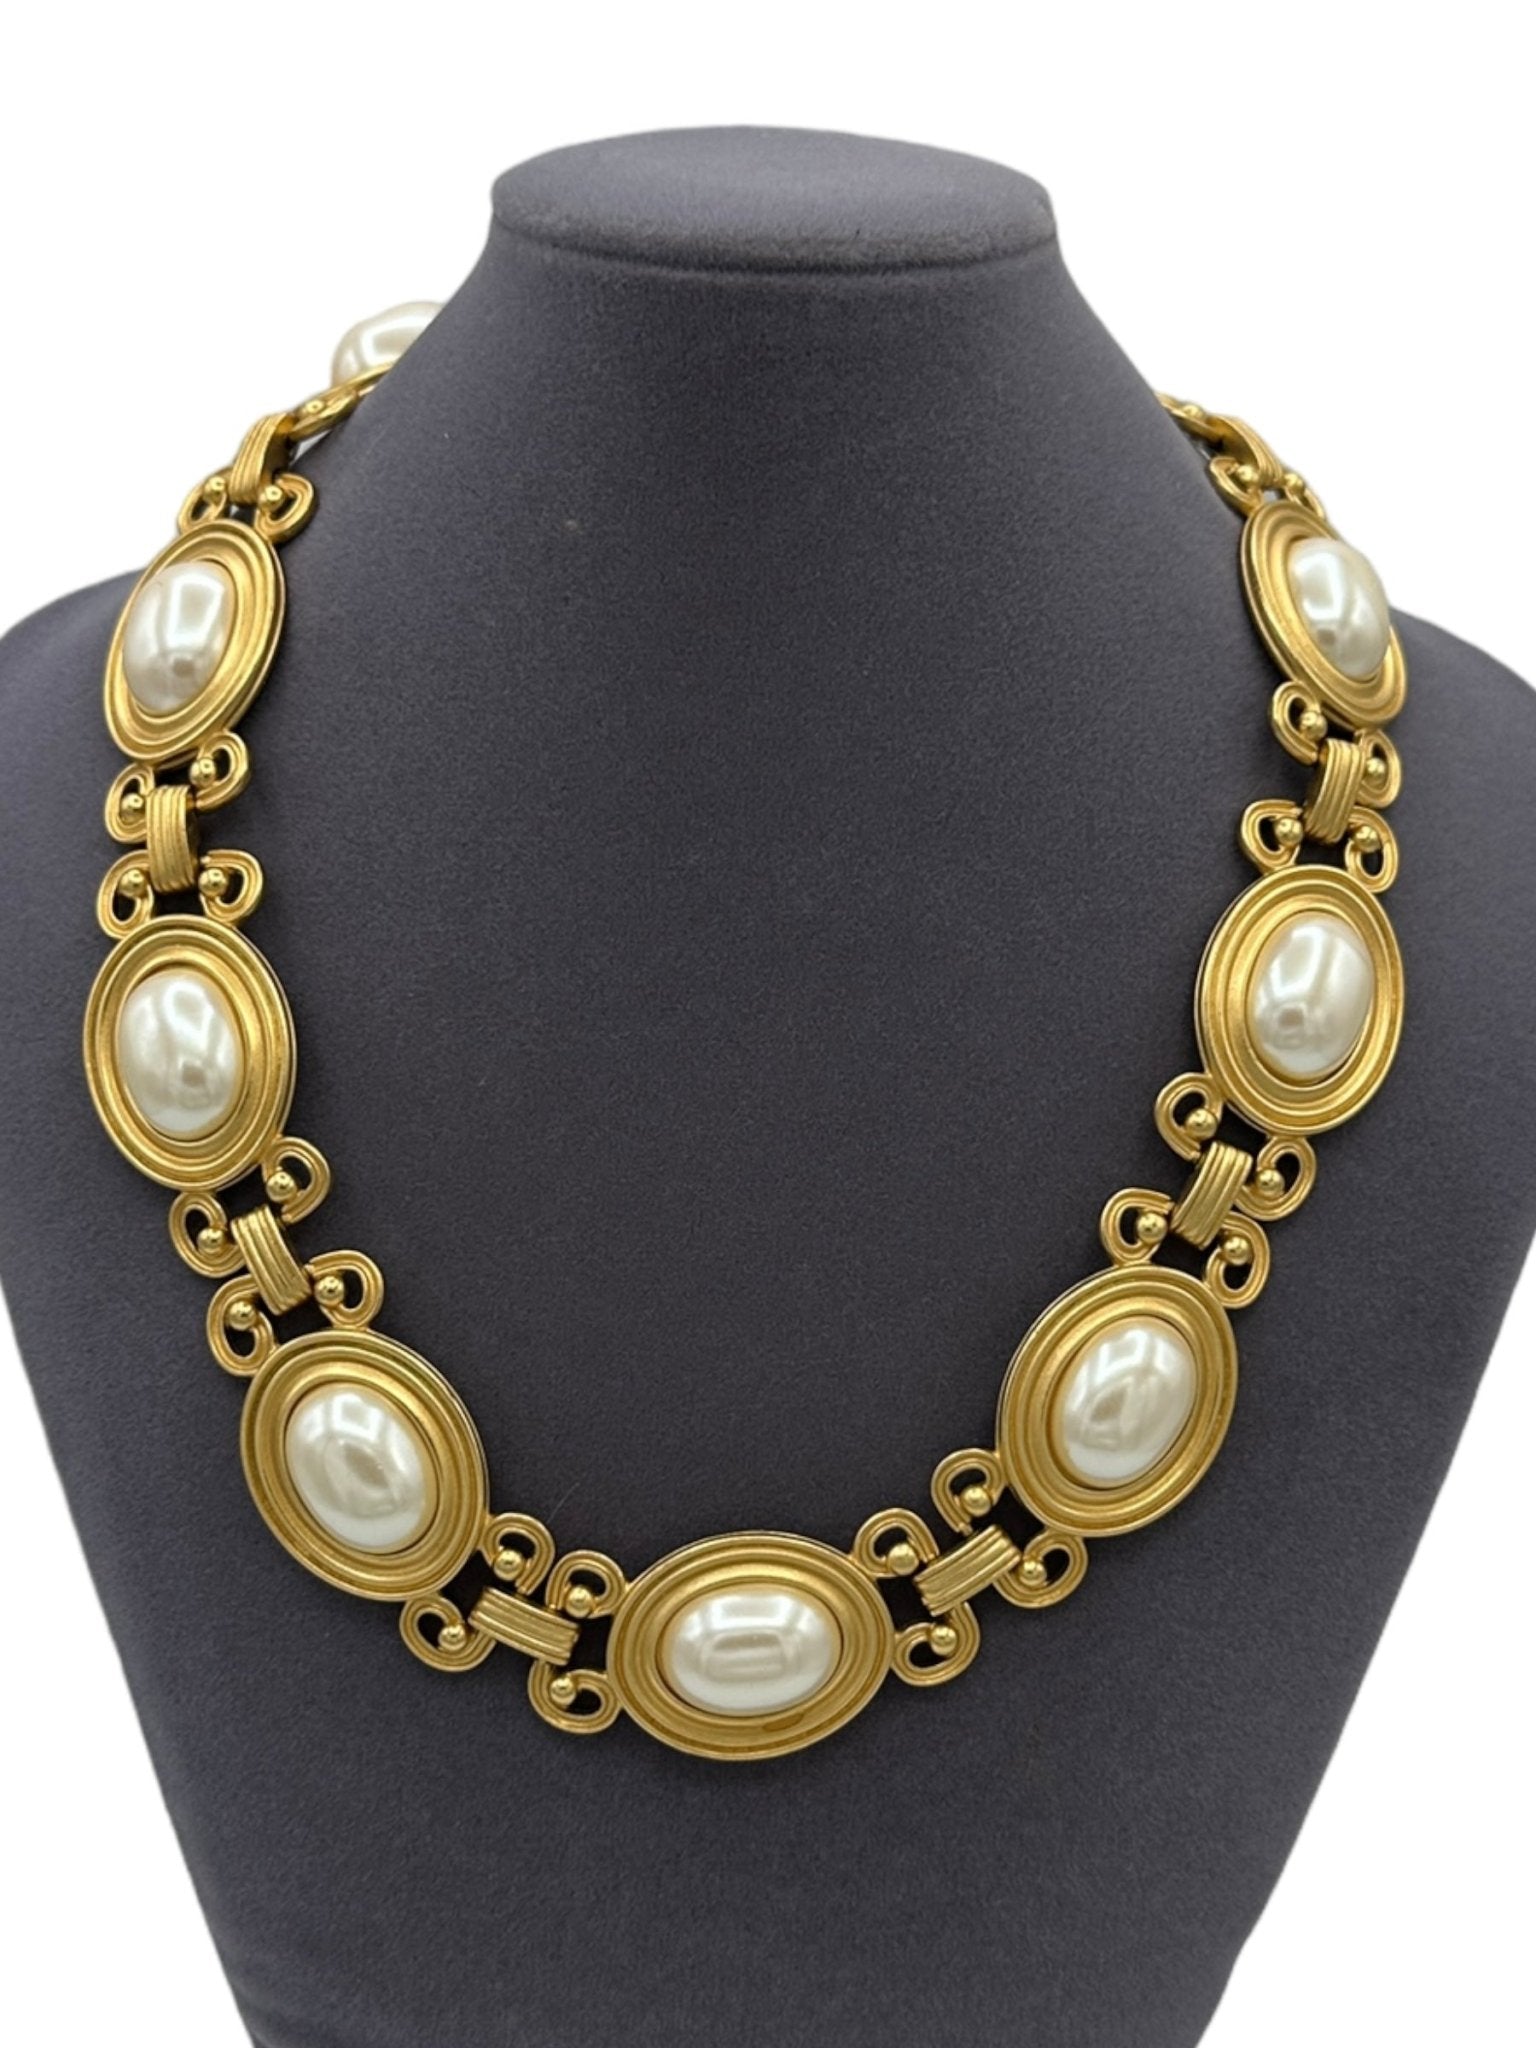 Monet Jewelry Collar Necklace And Stud Earring 2-pc. Simulated Pearl Jewelry  Set | CoolSprings Galleria